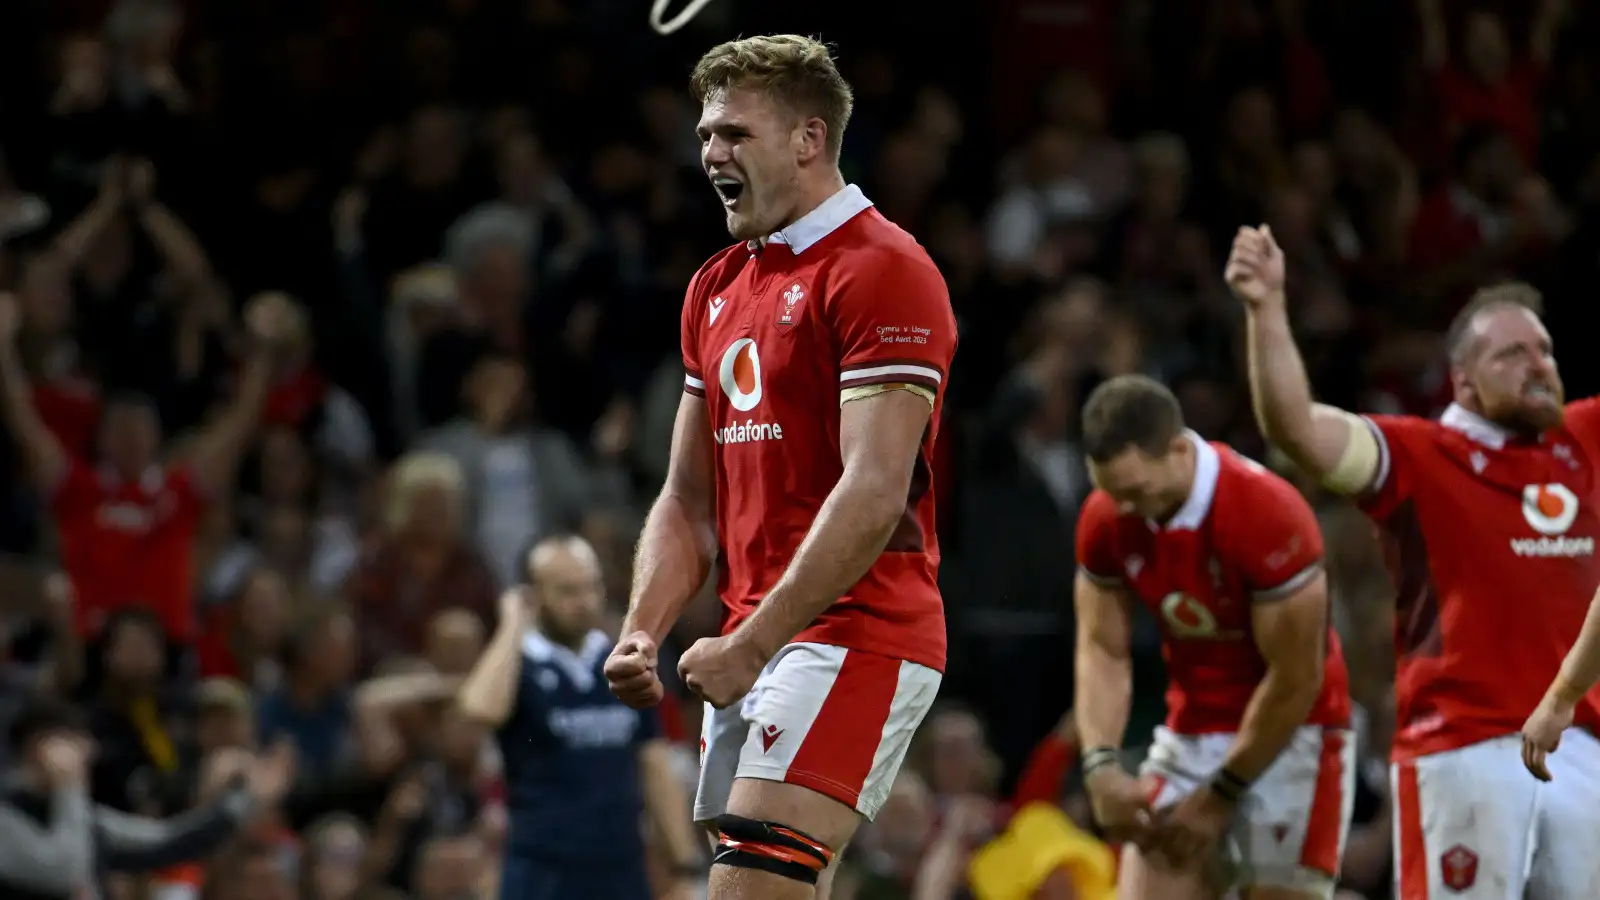 Taine Plumtree celebrates Wales win over England.